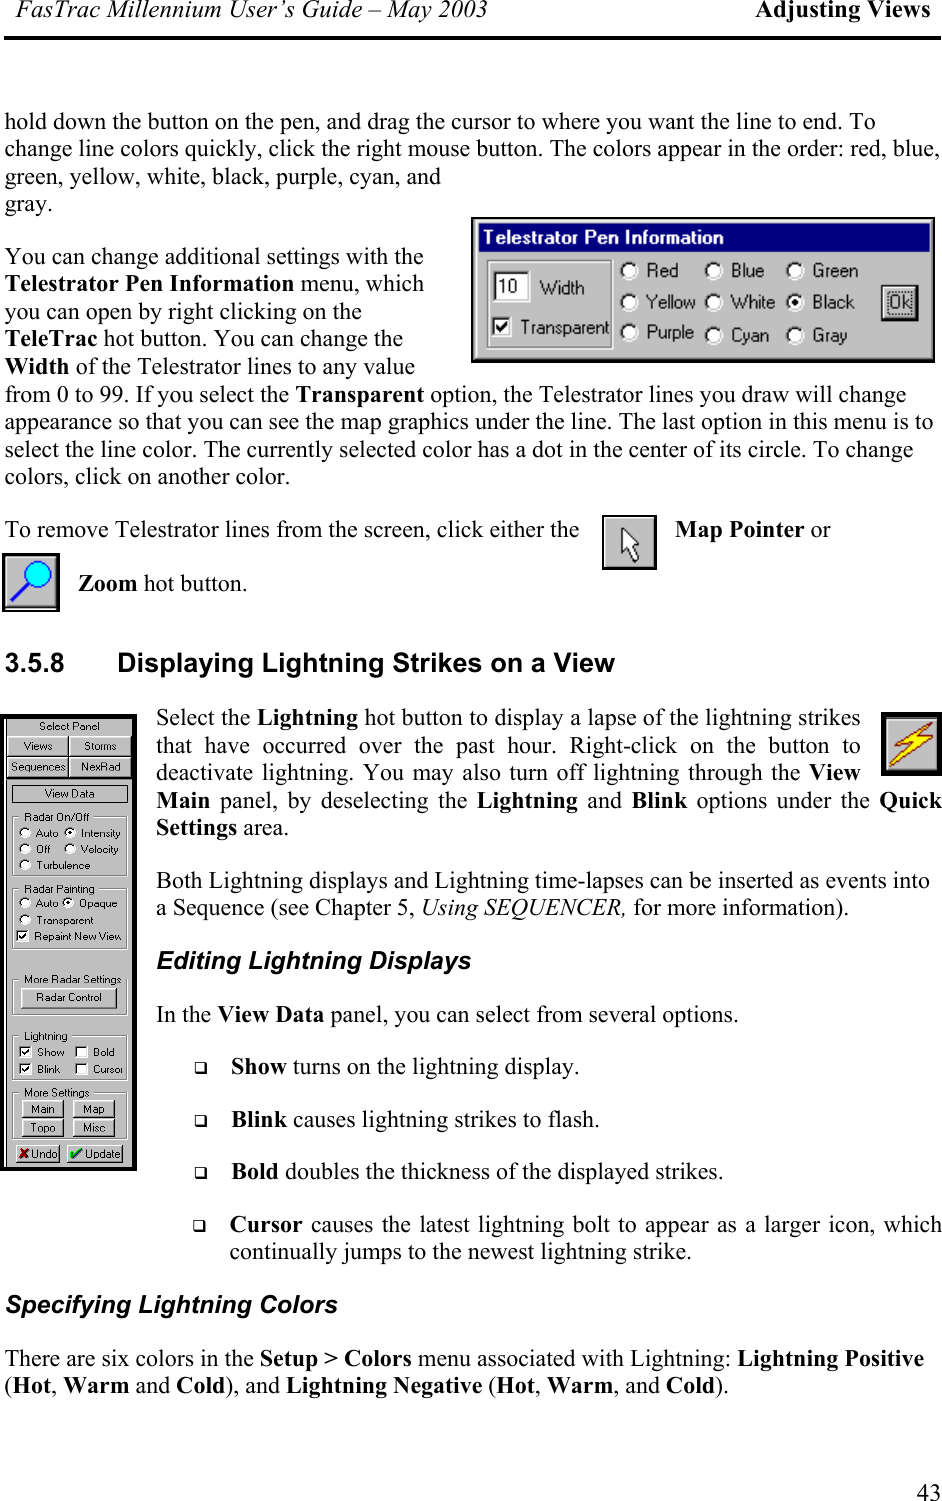 FasTrac Millennium User’s Guide – May 2003 Adjusting Views hold down the button on the pen, and drag the cursor to where you want the line to end. To change line colors quickly, click the right mouse button. The colors appear in the order: red, blue, green, yellow, white, black, purple, cyan, and gray. hich ge s to ge colors, click on another color. ove Telestrator lines from the screen, click either the  Map Pointer or         Zoom hot button. 3.5.8  Displaying Lightning Strikes on a View y deselecting the Lightning and Blink options under the Quick Settings area. nts into a Sequence (see Chapter 5, Using SEQUENCER, for more information). Editing Lightning Displays In the View Data panel, you can select from several options.    Show turns on the lightning display.    Blink causes lightning strikes to flash.   Bold doubles the thickness of the displayed strikes.   r as a larger icon, which continually jumps to the newest lightning strike. Specifying Lightning Colors ightning Positive (Hot, Warm and Cold), and Lightning Negative (Hot, Warm, and Cold).  You can change additional settings with the Telestrator Pen Information menu, wyou can open by right clicking on the TeleTrac hot button. You can change the Width of the Telestrator lines to any value from 0 to 99. If you select the Transparent option, the Telestrator lines you draw will chanappearance so that you can see the map graphics under the line. The last option in this menu iselect the line color. The currently selected color has a dot in the center of its circle. To chanTo remSelect the Lightning hot button to display a lapse of the lightning strikes that have occurred over the past hour. Right-click on the button to deactivate lightning. You may also turn off lightning through the View Main panel, bBoth Lightning displays and Lightning time-lapses can be inserted as eveCursor causes the latest lightning bolt to appeaThere are six colors in the Setup &gt; Colors menu associated with Lightning: L43 